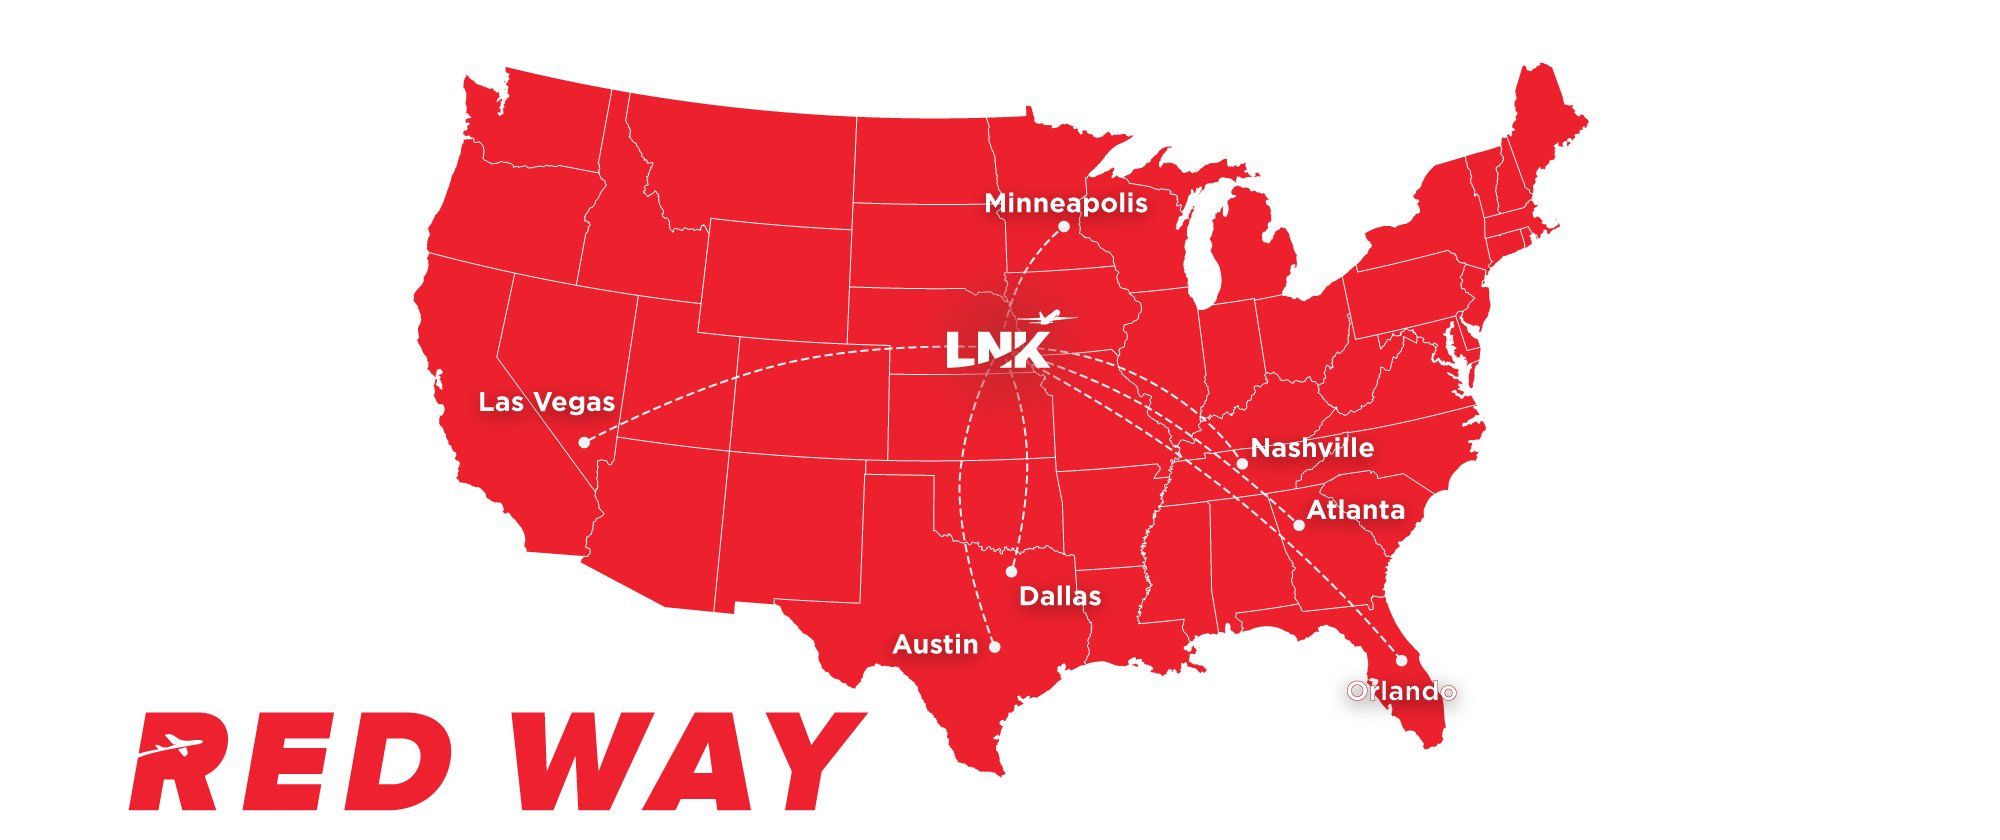 Red Way Announces 7 Airbus A320 Family Routes From Nebraska